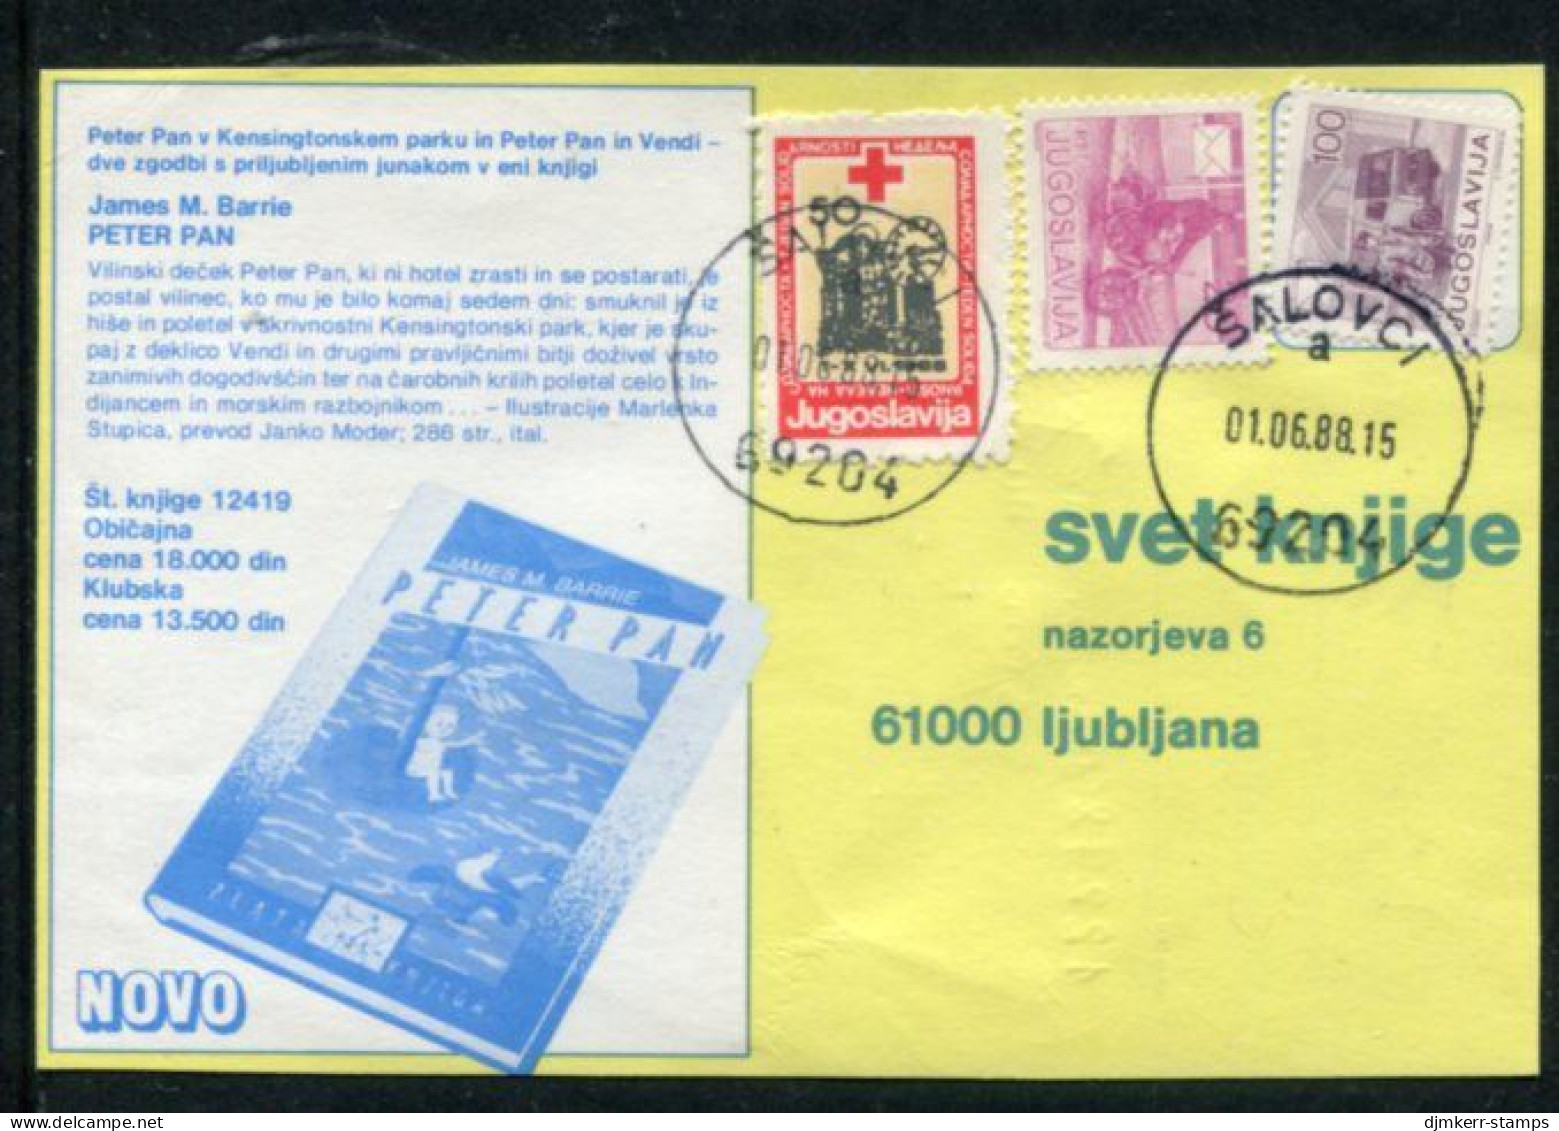 YUGOSLAVIA 1988 Solidarity Week 50 D. Tax Used On Commercial Postcard.  Michel ZZM 155 - Charity Issues